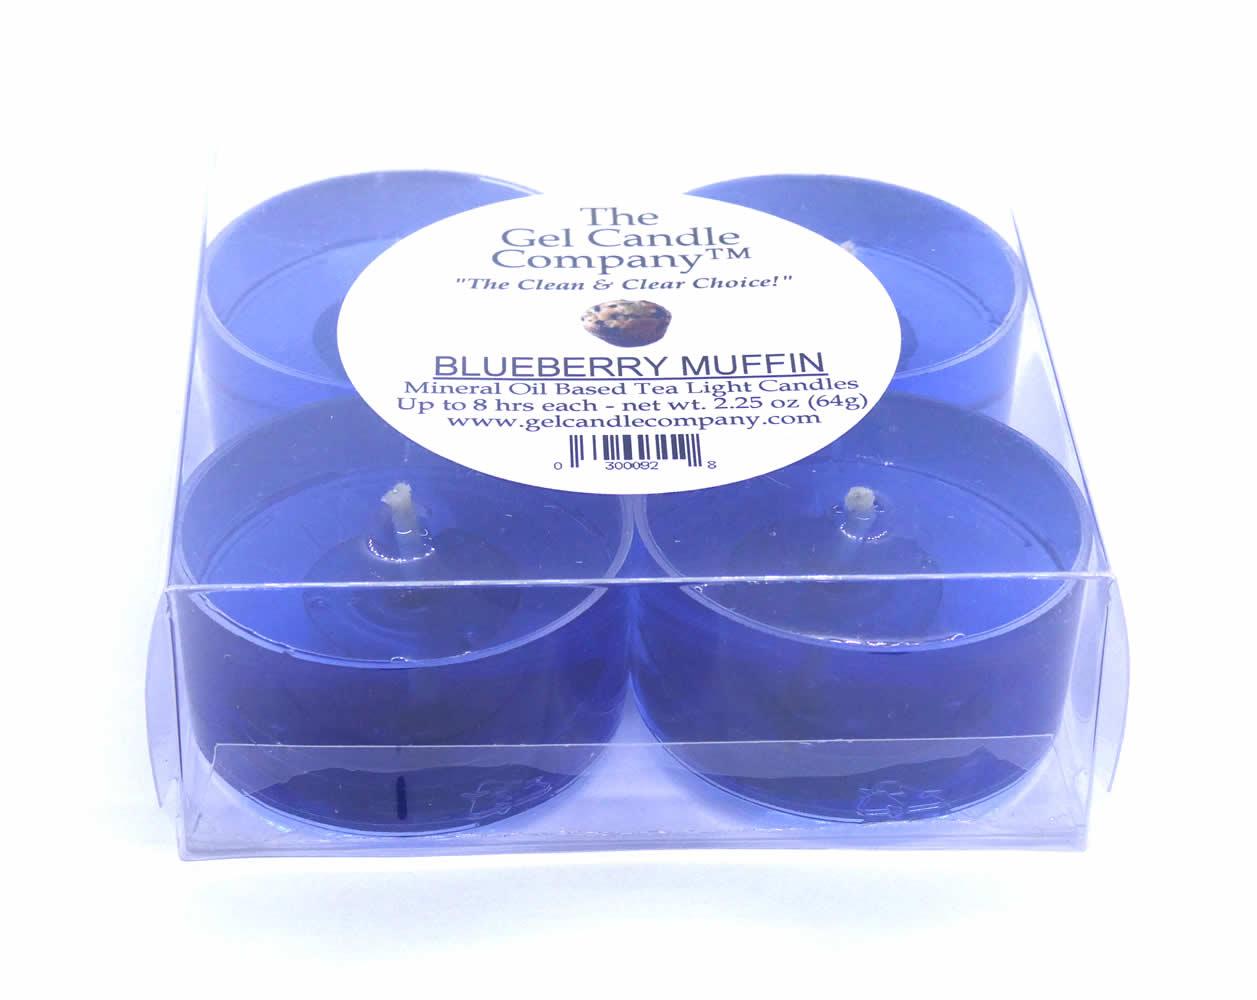 Blueberry Muffin Scented Gel Candle Tea Lights - 4 pk.